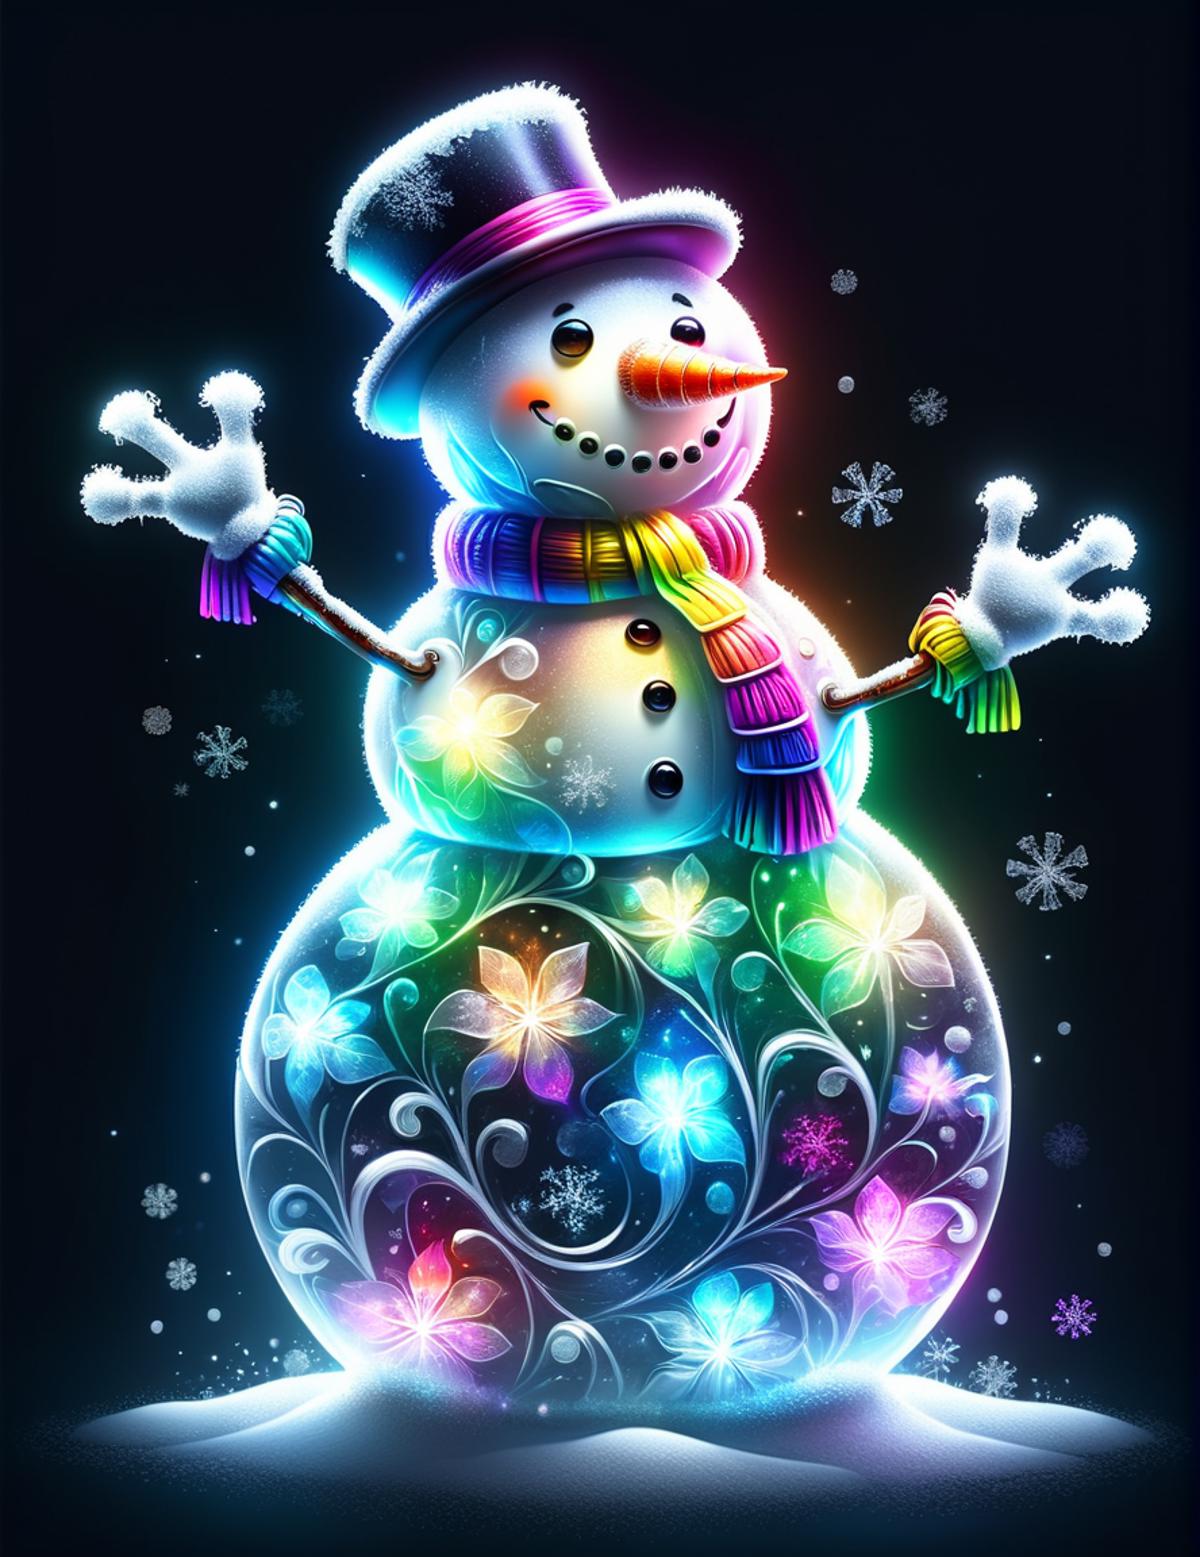 A colorful and lively snowman with a rainbow scarf and decorative flowers.